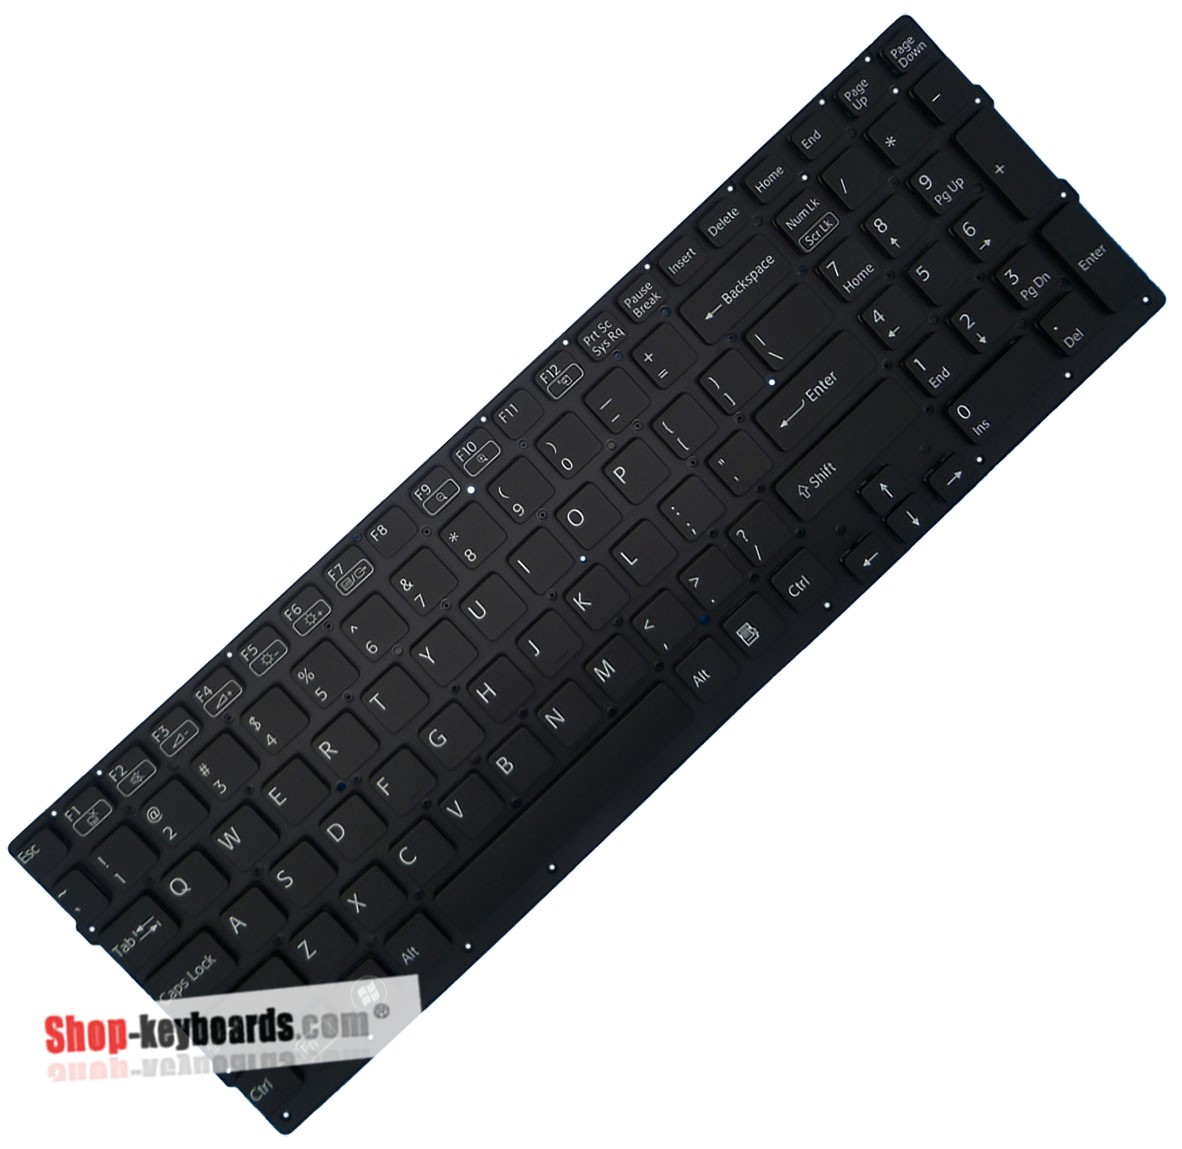 Sony VAIO PCG-71613T Keyboard replacement